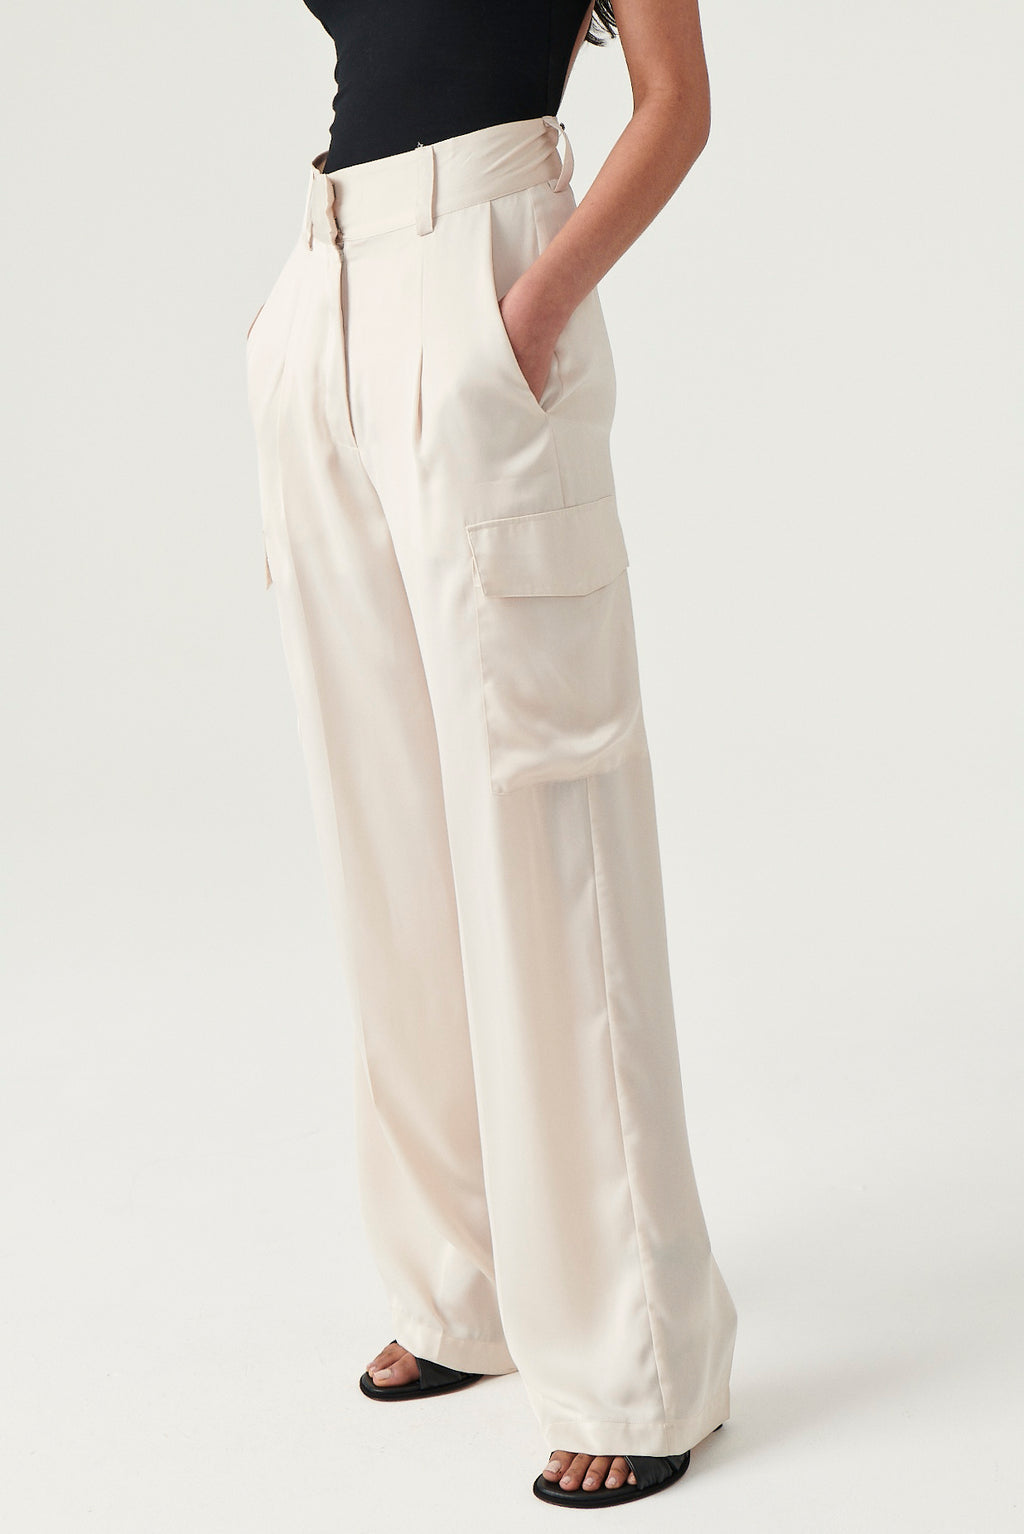 ba&sh Cary Pant in Champagne